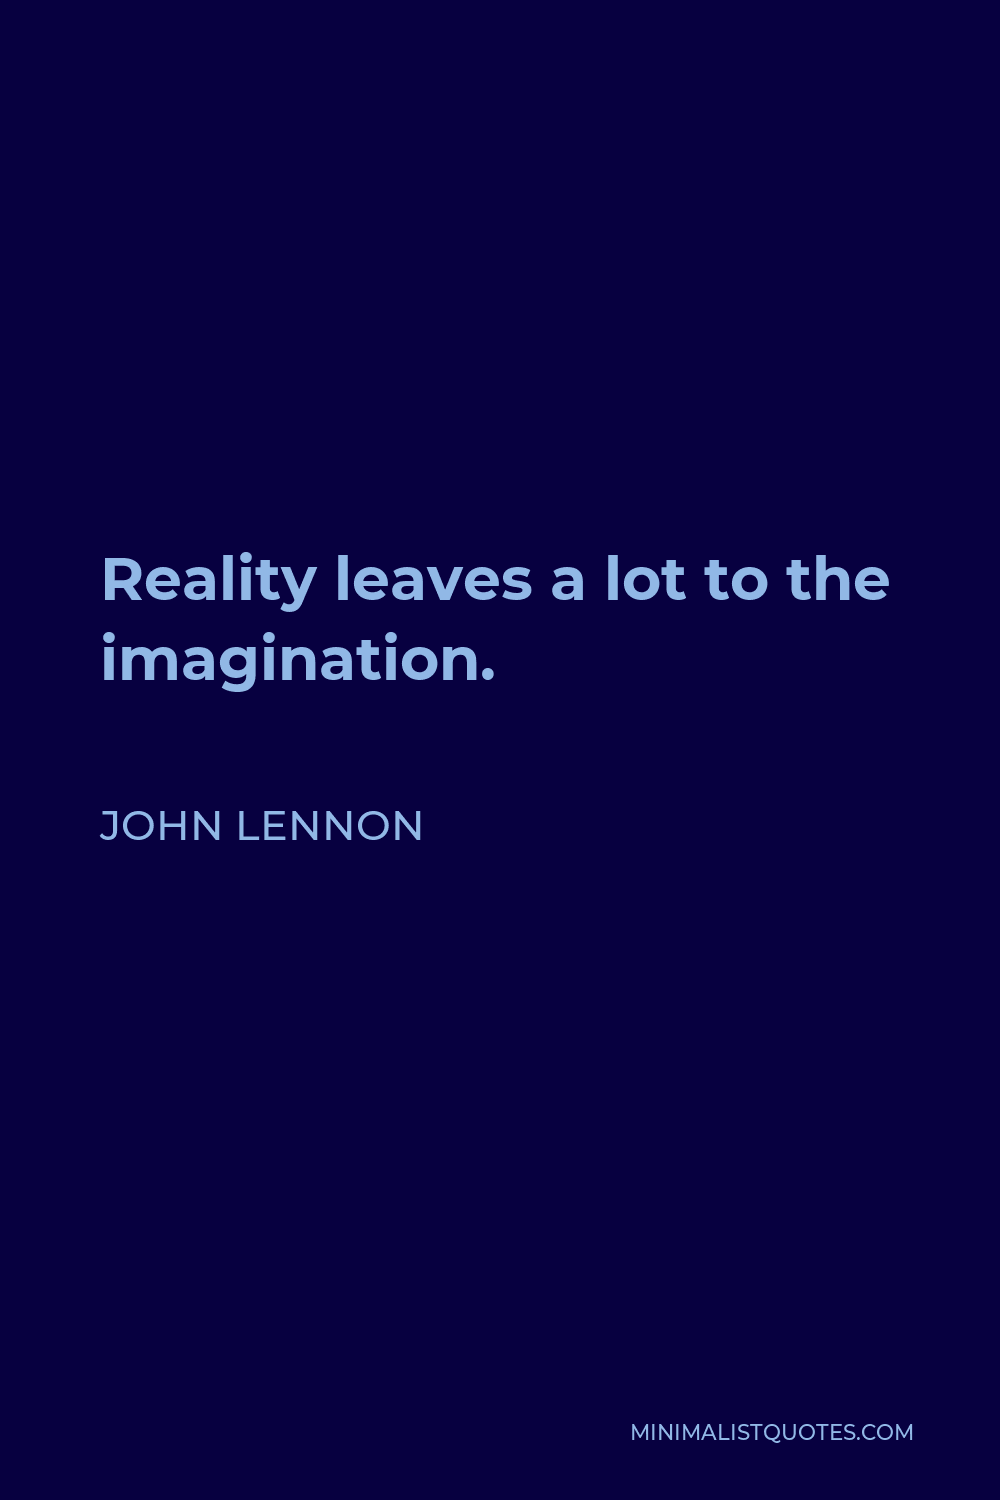 John Lennon Quote - Reality leaves a lot to the imagination.